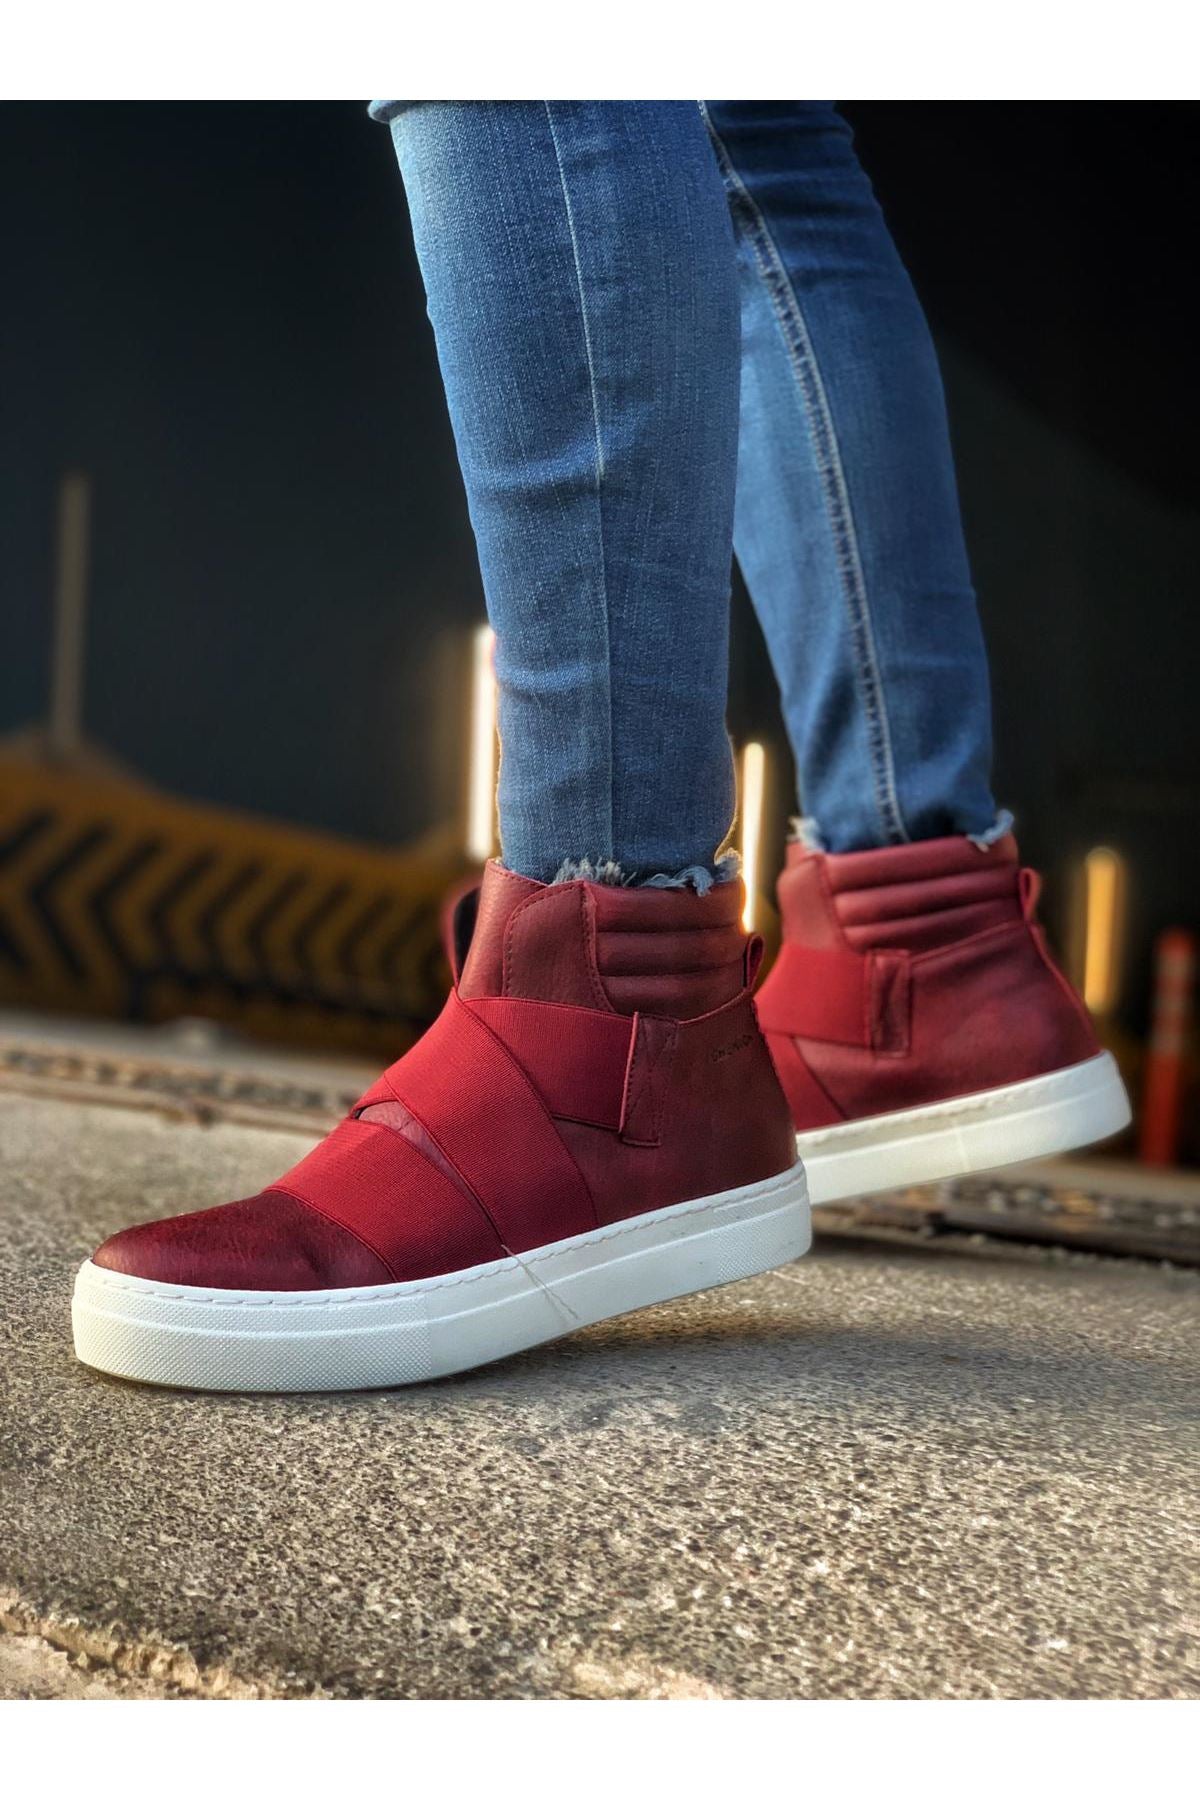 CH023 Men's Banded Red-White Sole Casual Sneaker Boots - STREETMODE ™